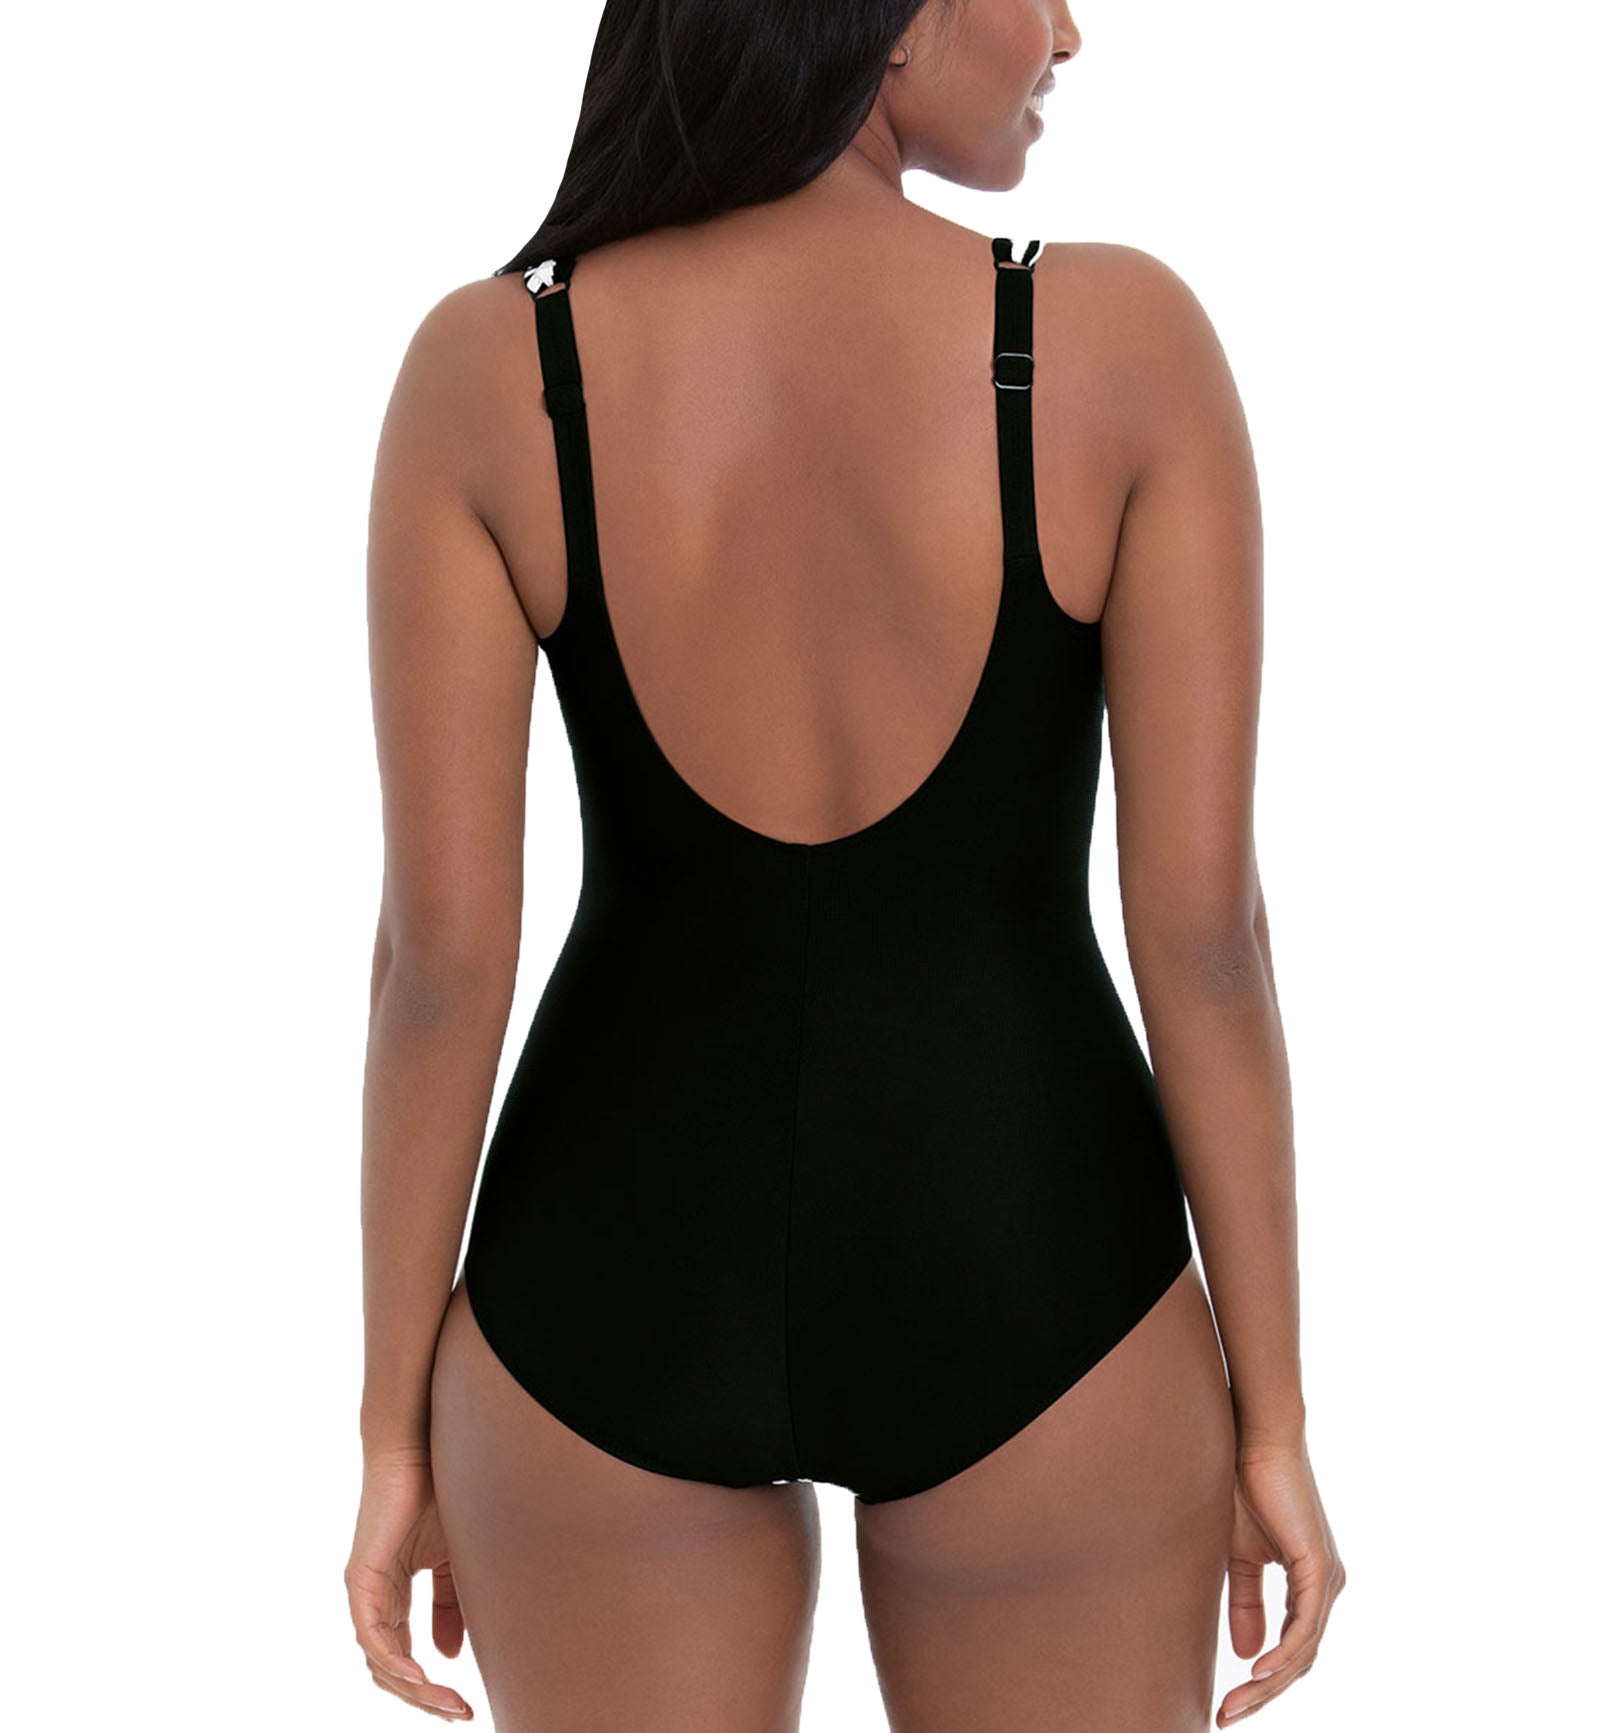 Anita Pure Graphics Dalida Slimming Lined One Piece Swimsuit (7225),32D,Black/White - Black/White,32D